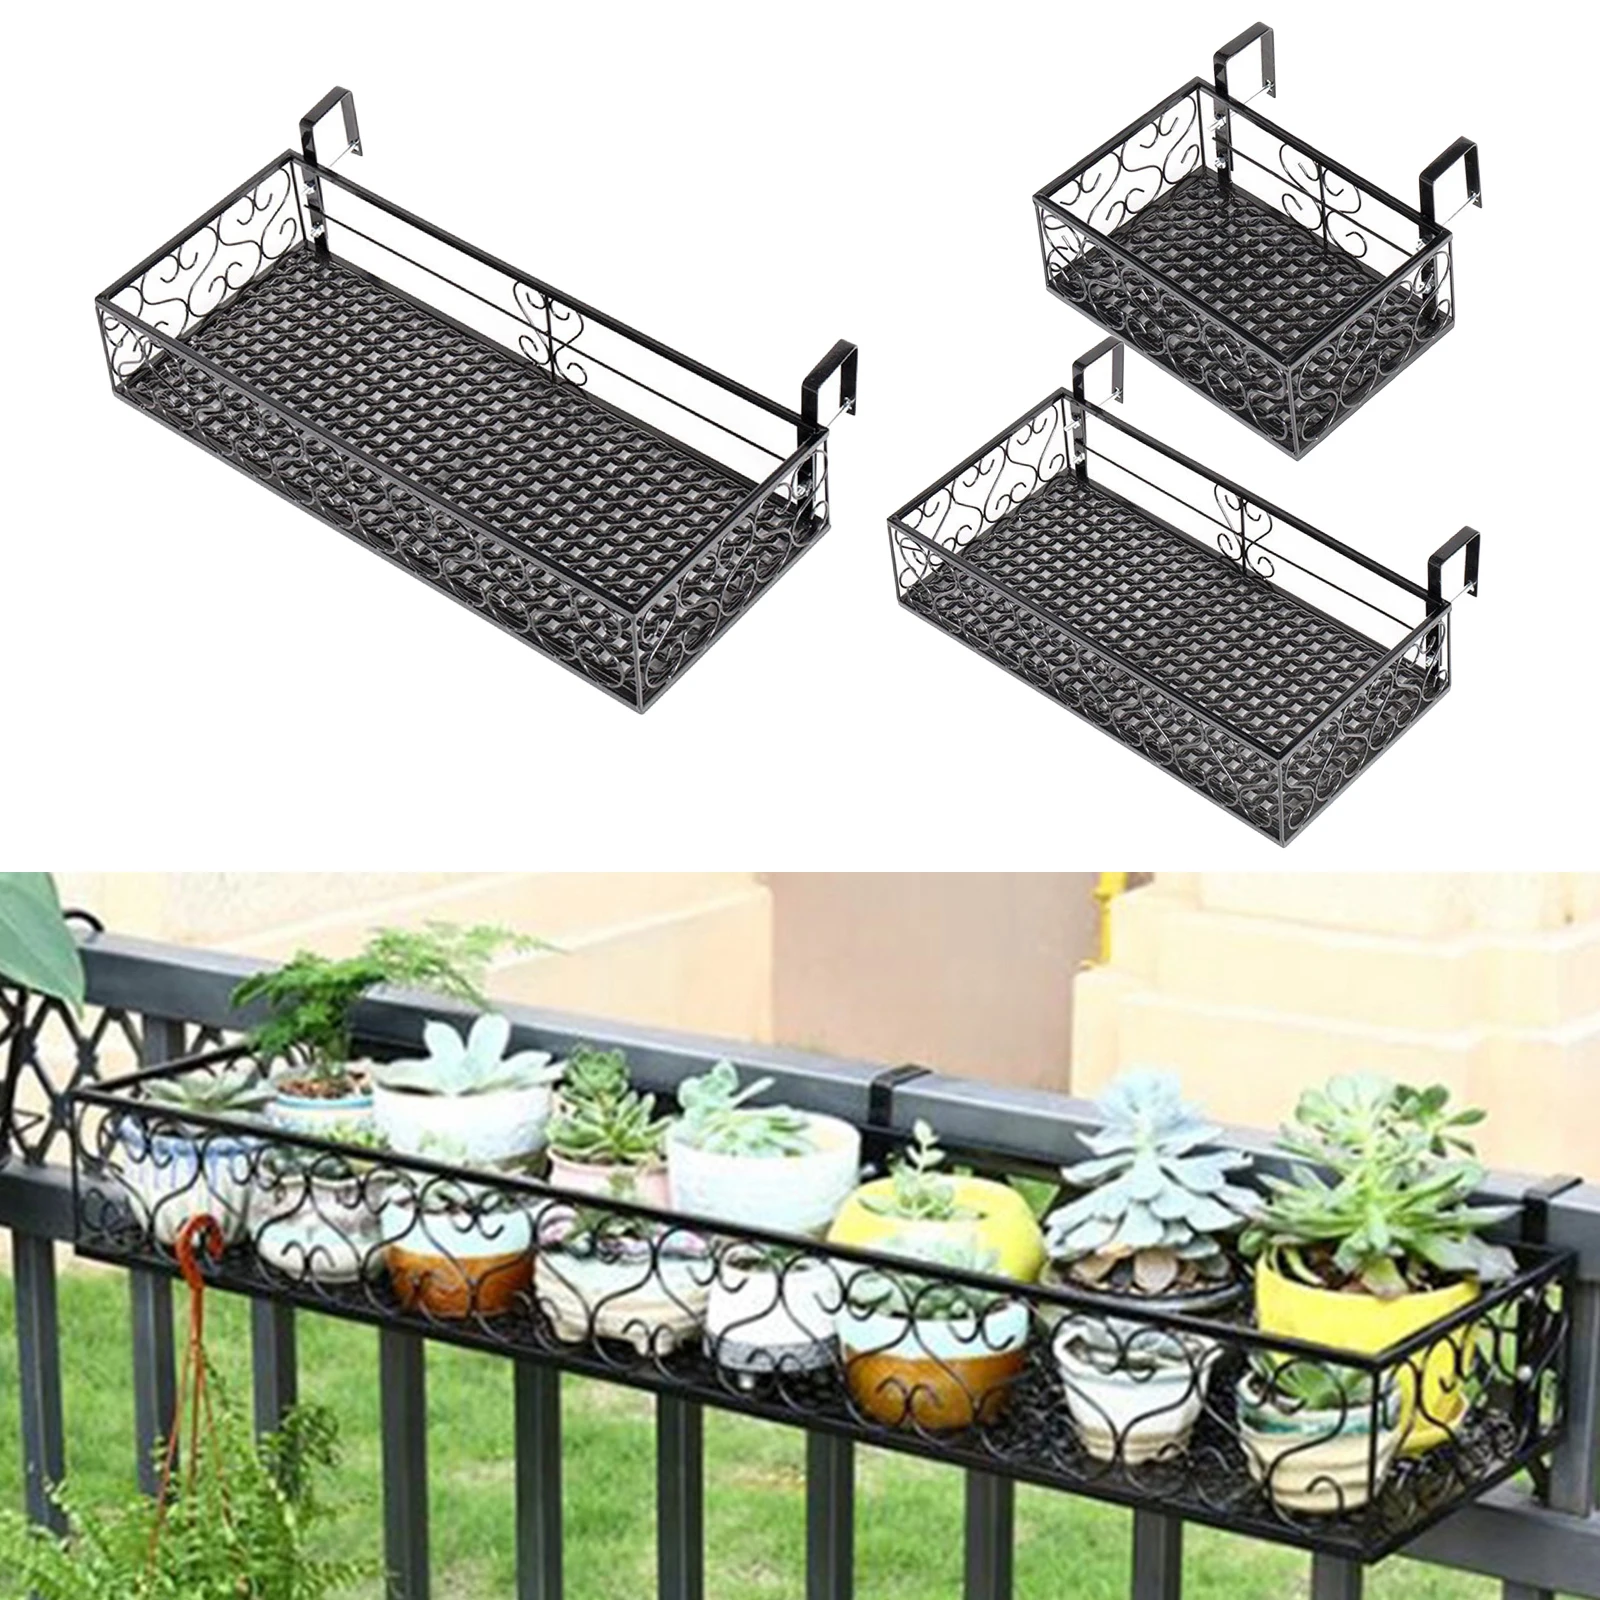 Cast Iron Metal Planter Shelf Holder Balcony Flowerpot ing Rack Storage Stand for Indoor and Outdoor Porches Patio Decor